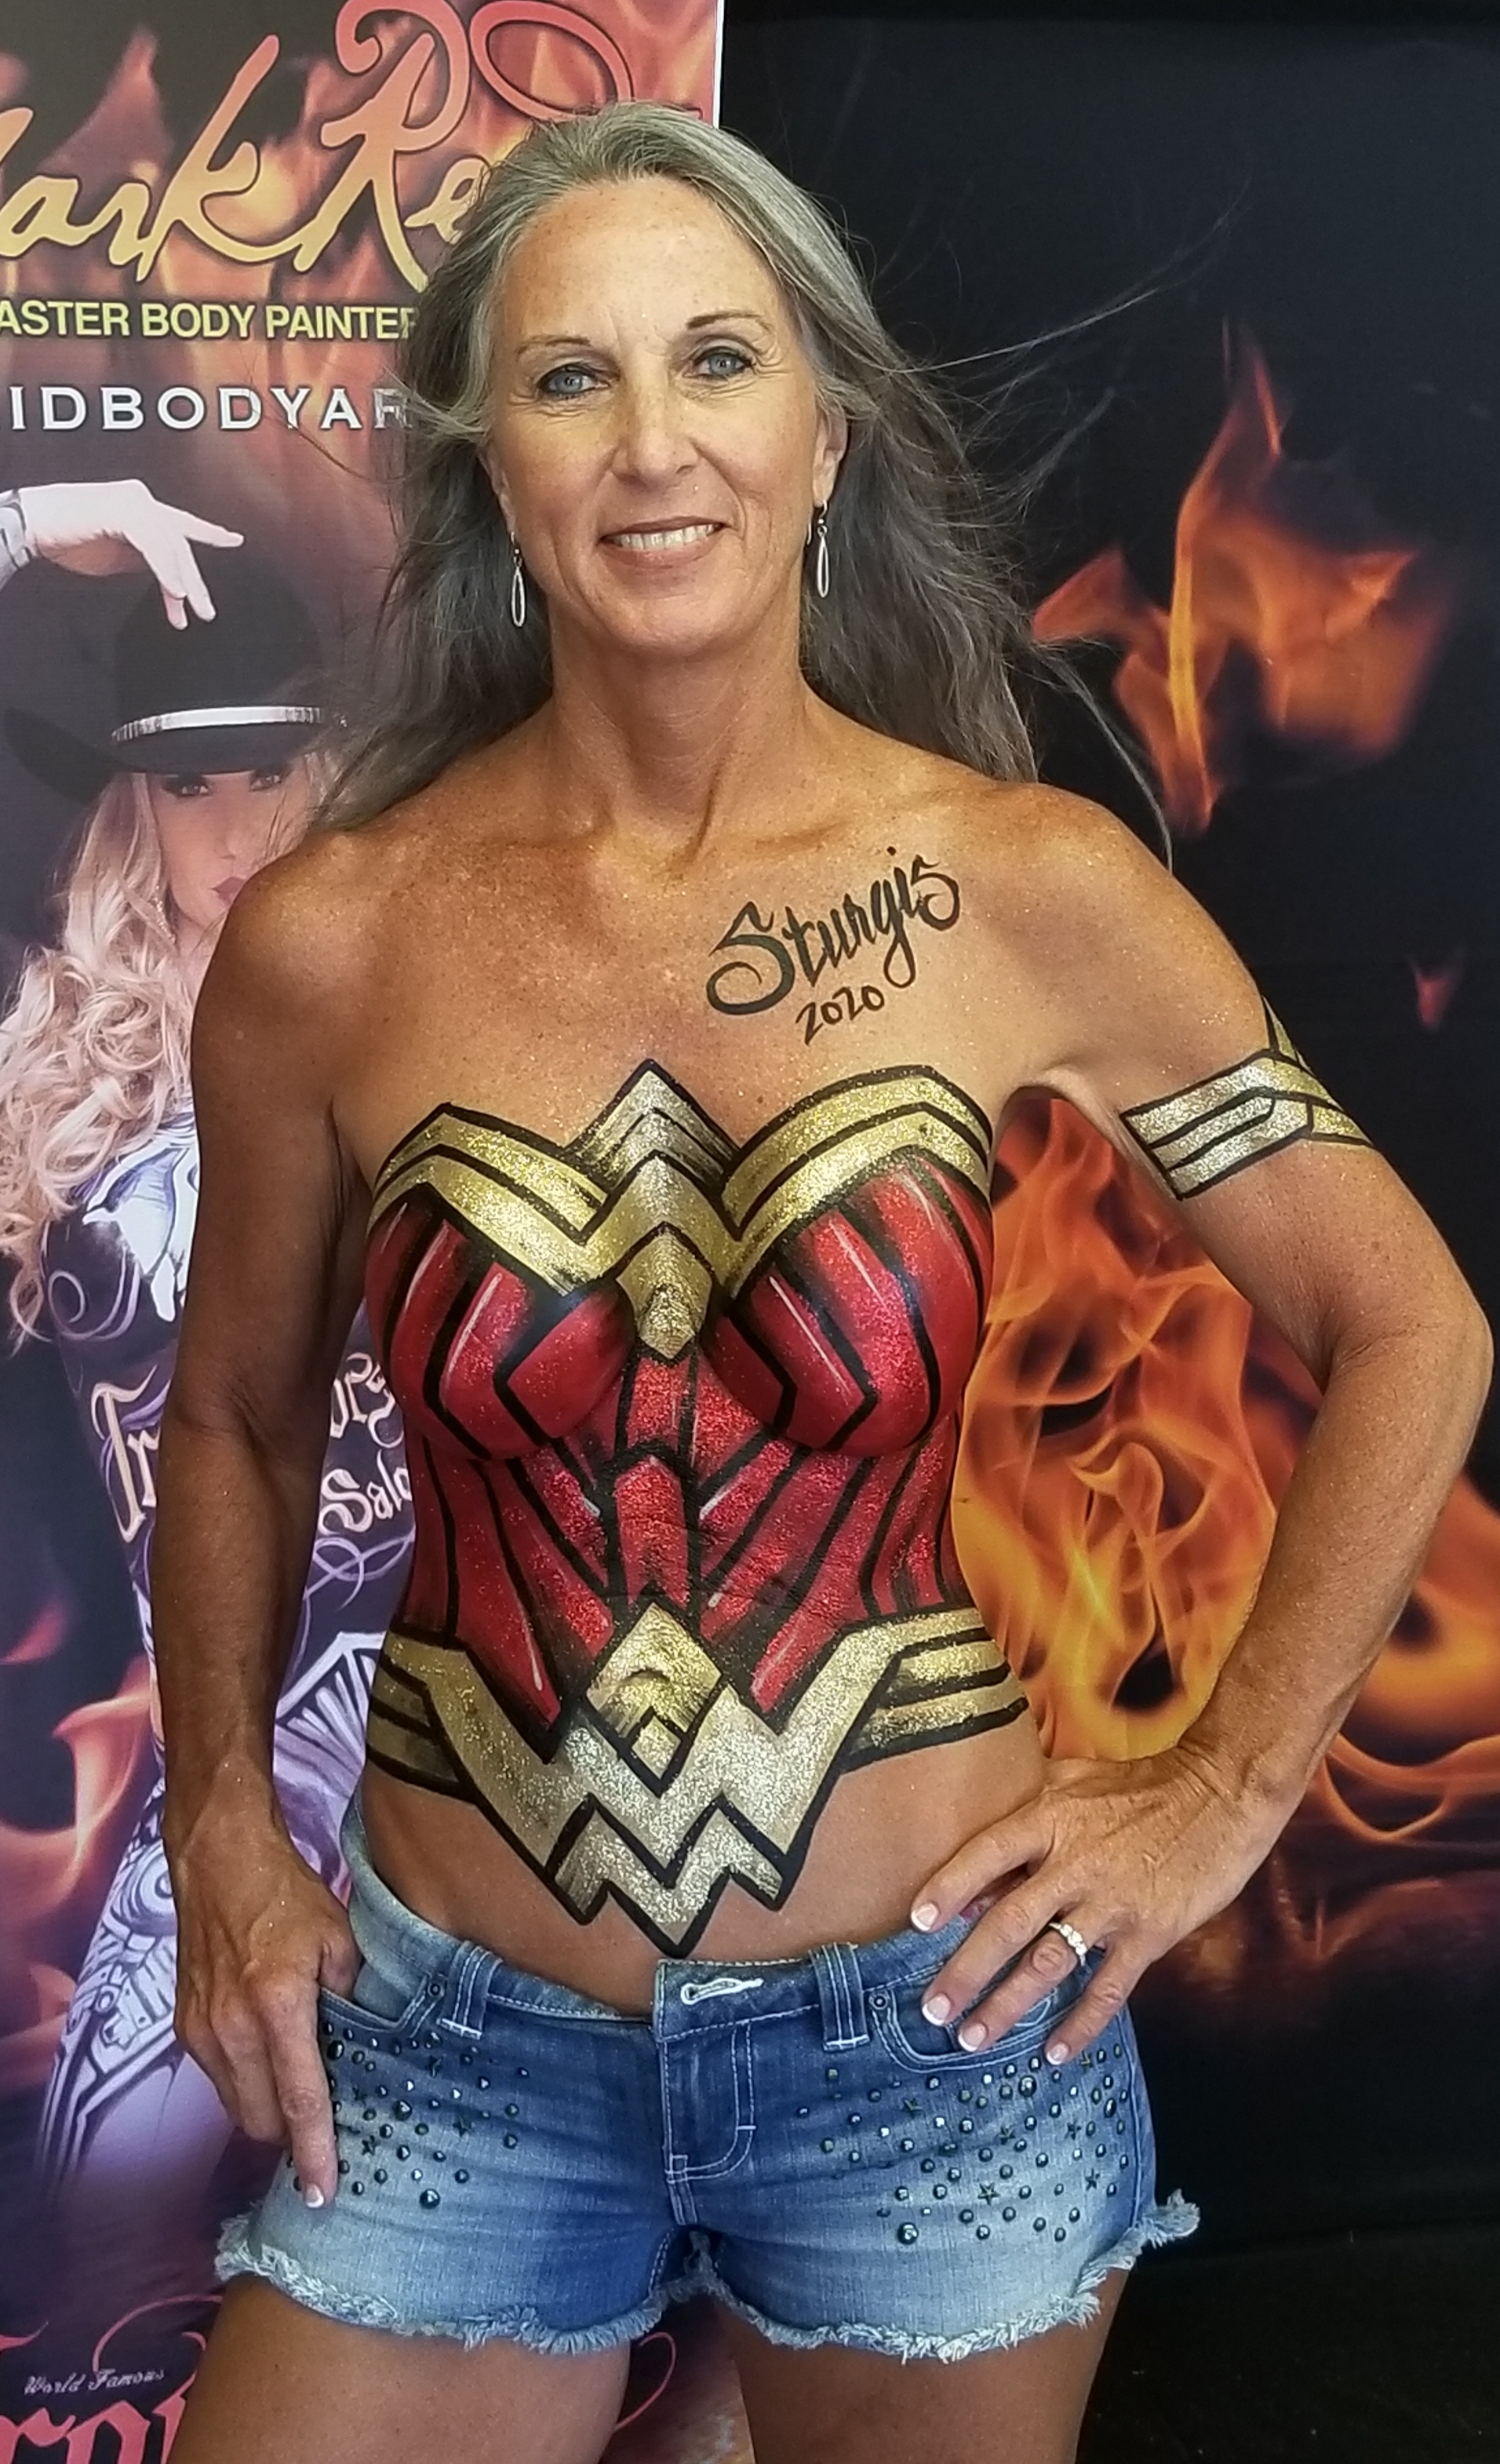 long haired blonde model with a wonder woman super hero costume painted on her top half